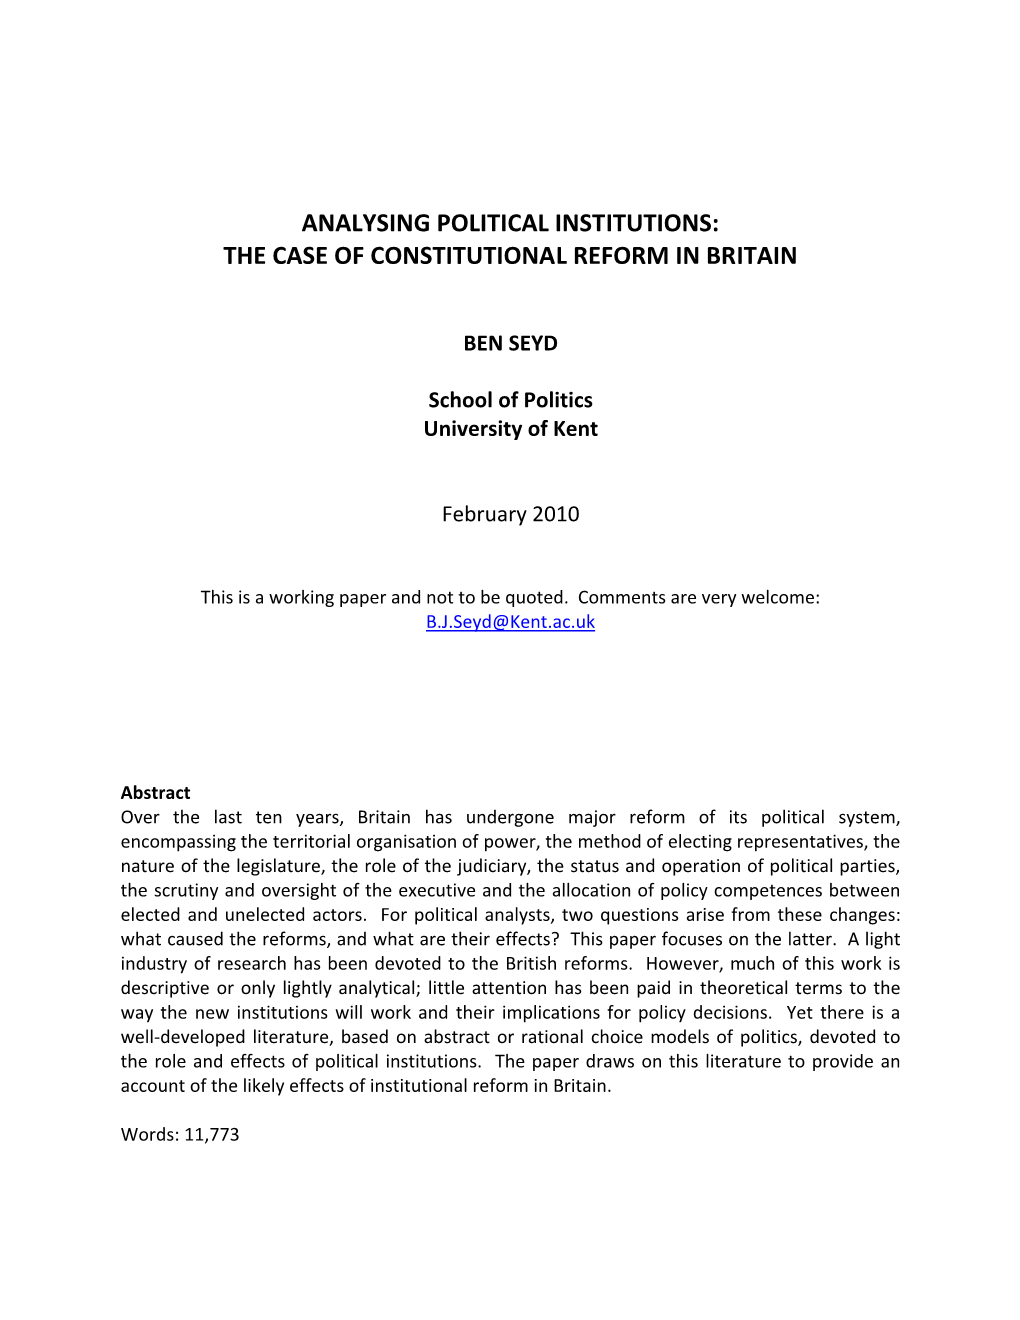 Analysing Political Institutions: the Case of Constitutional Reform in Britain